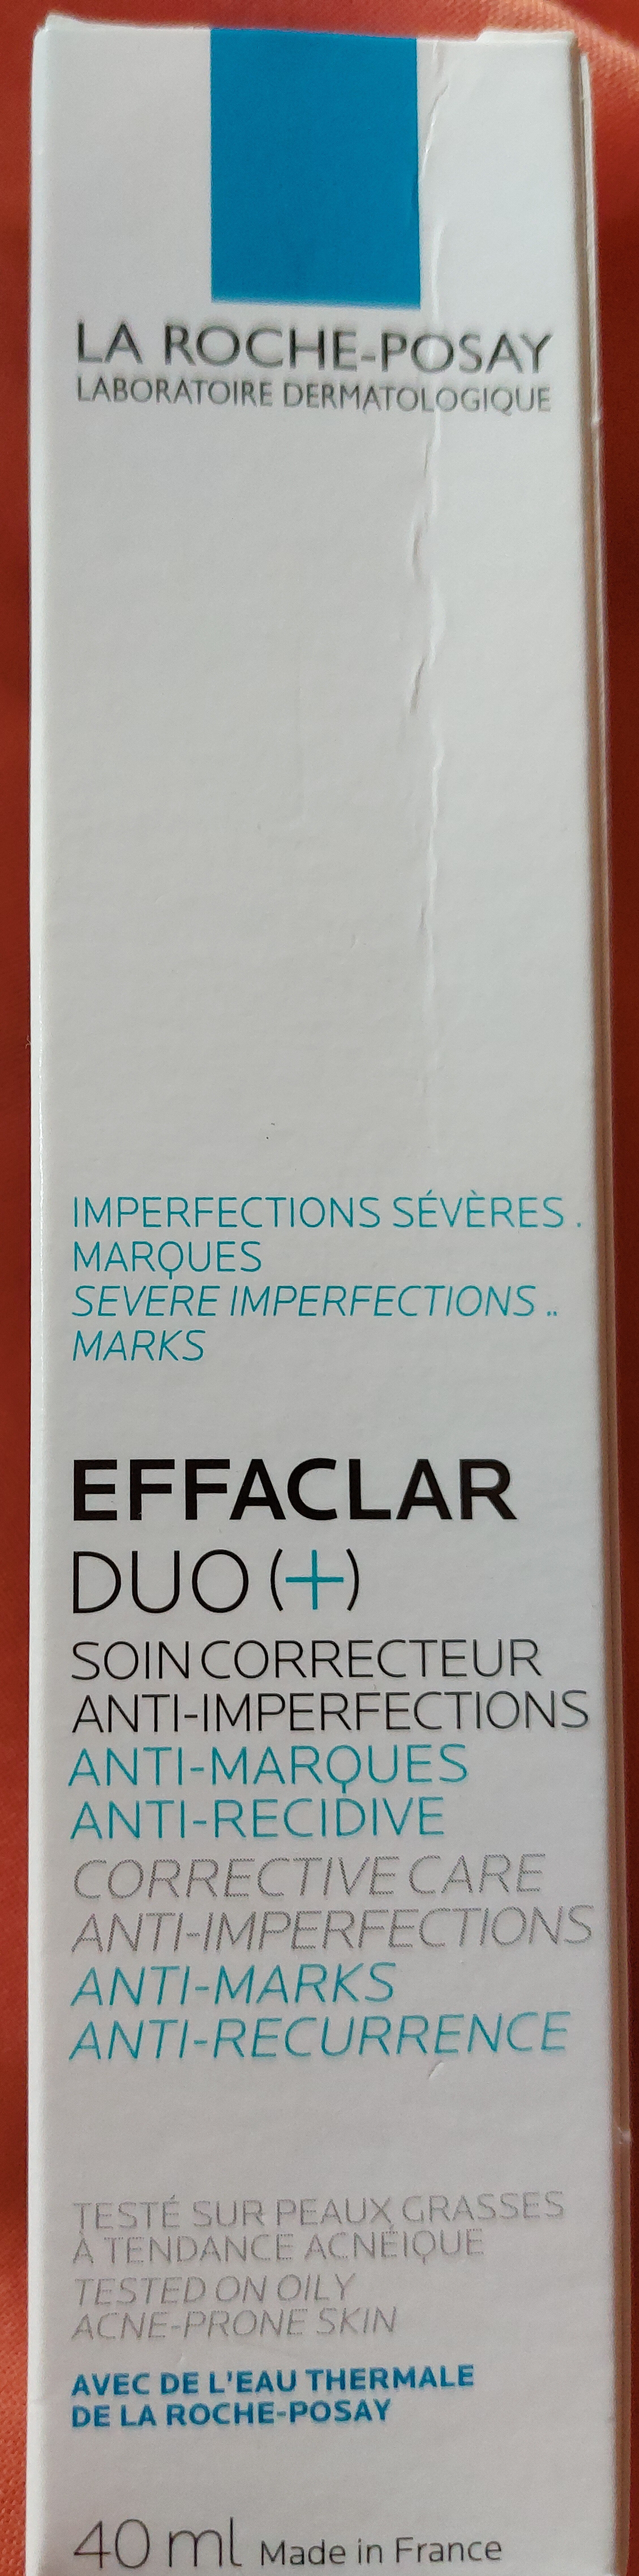 Effaclar Duo (+) soin anti-imperfections - Product - fr